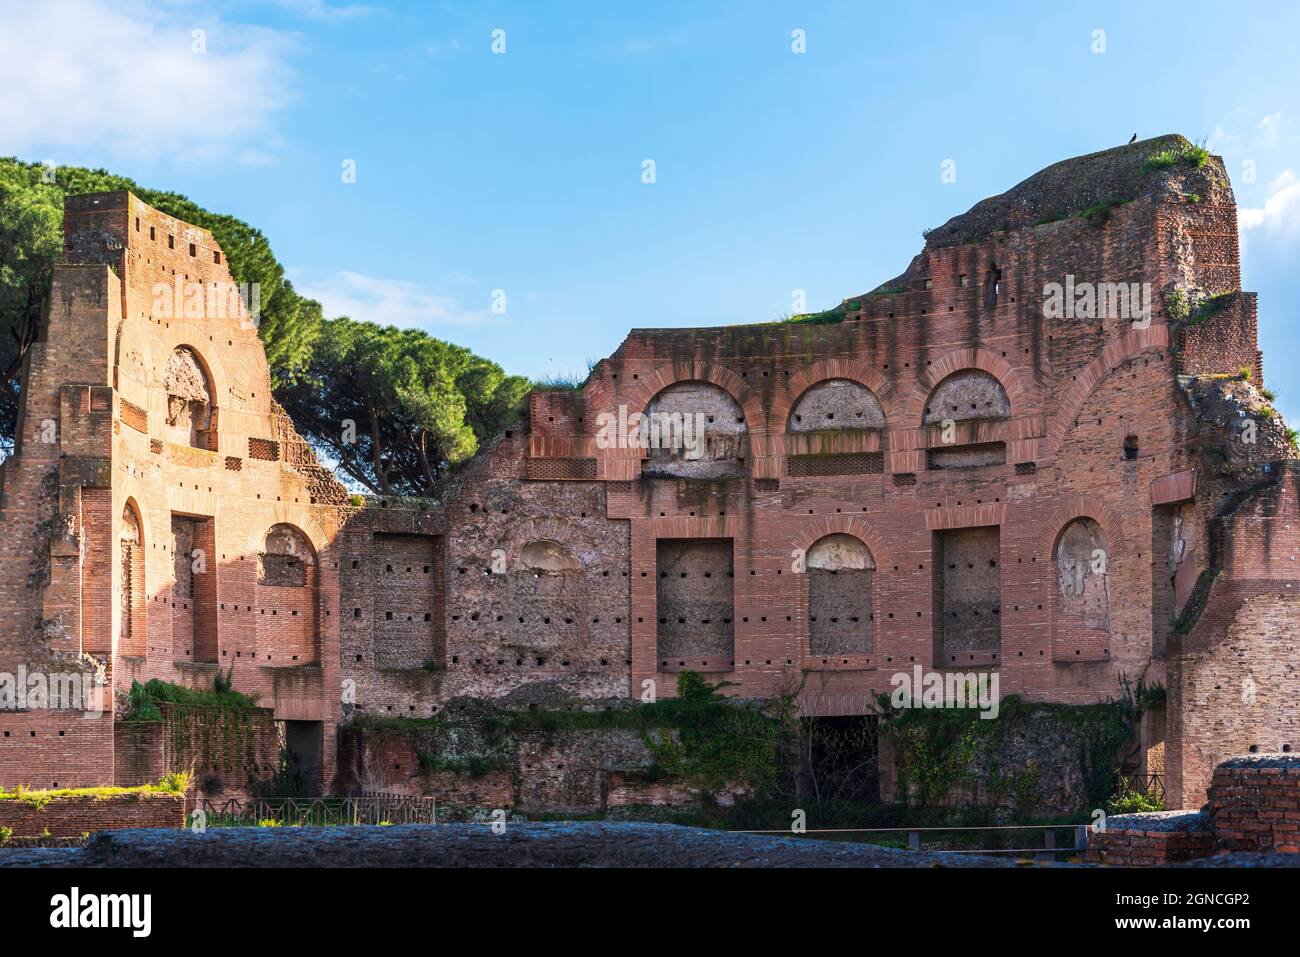 Ruins of ancient roman building in Italy Stock Photo